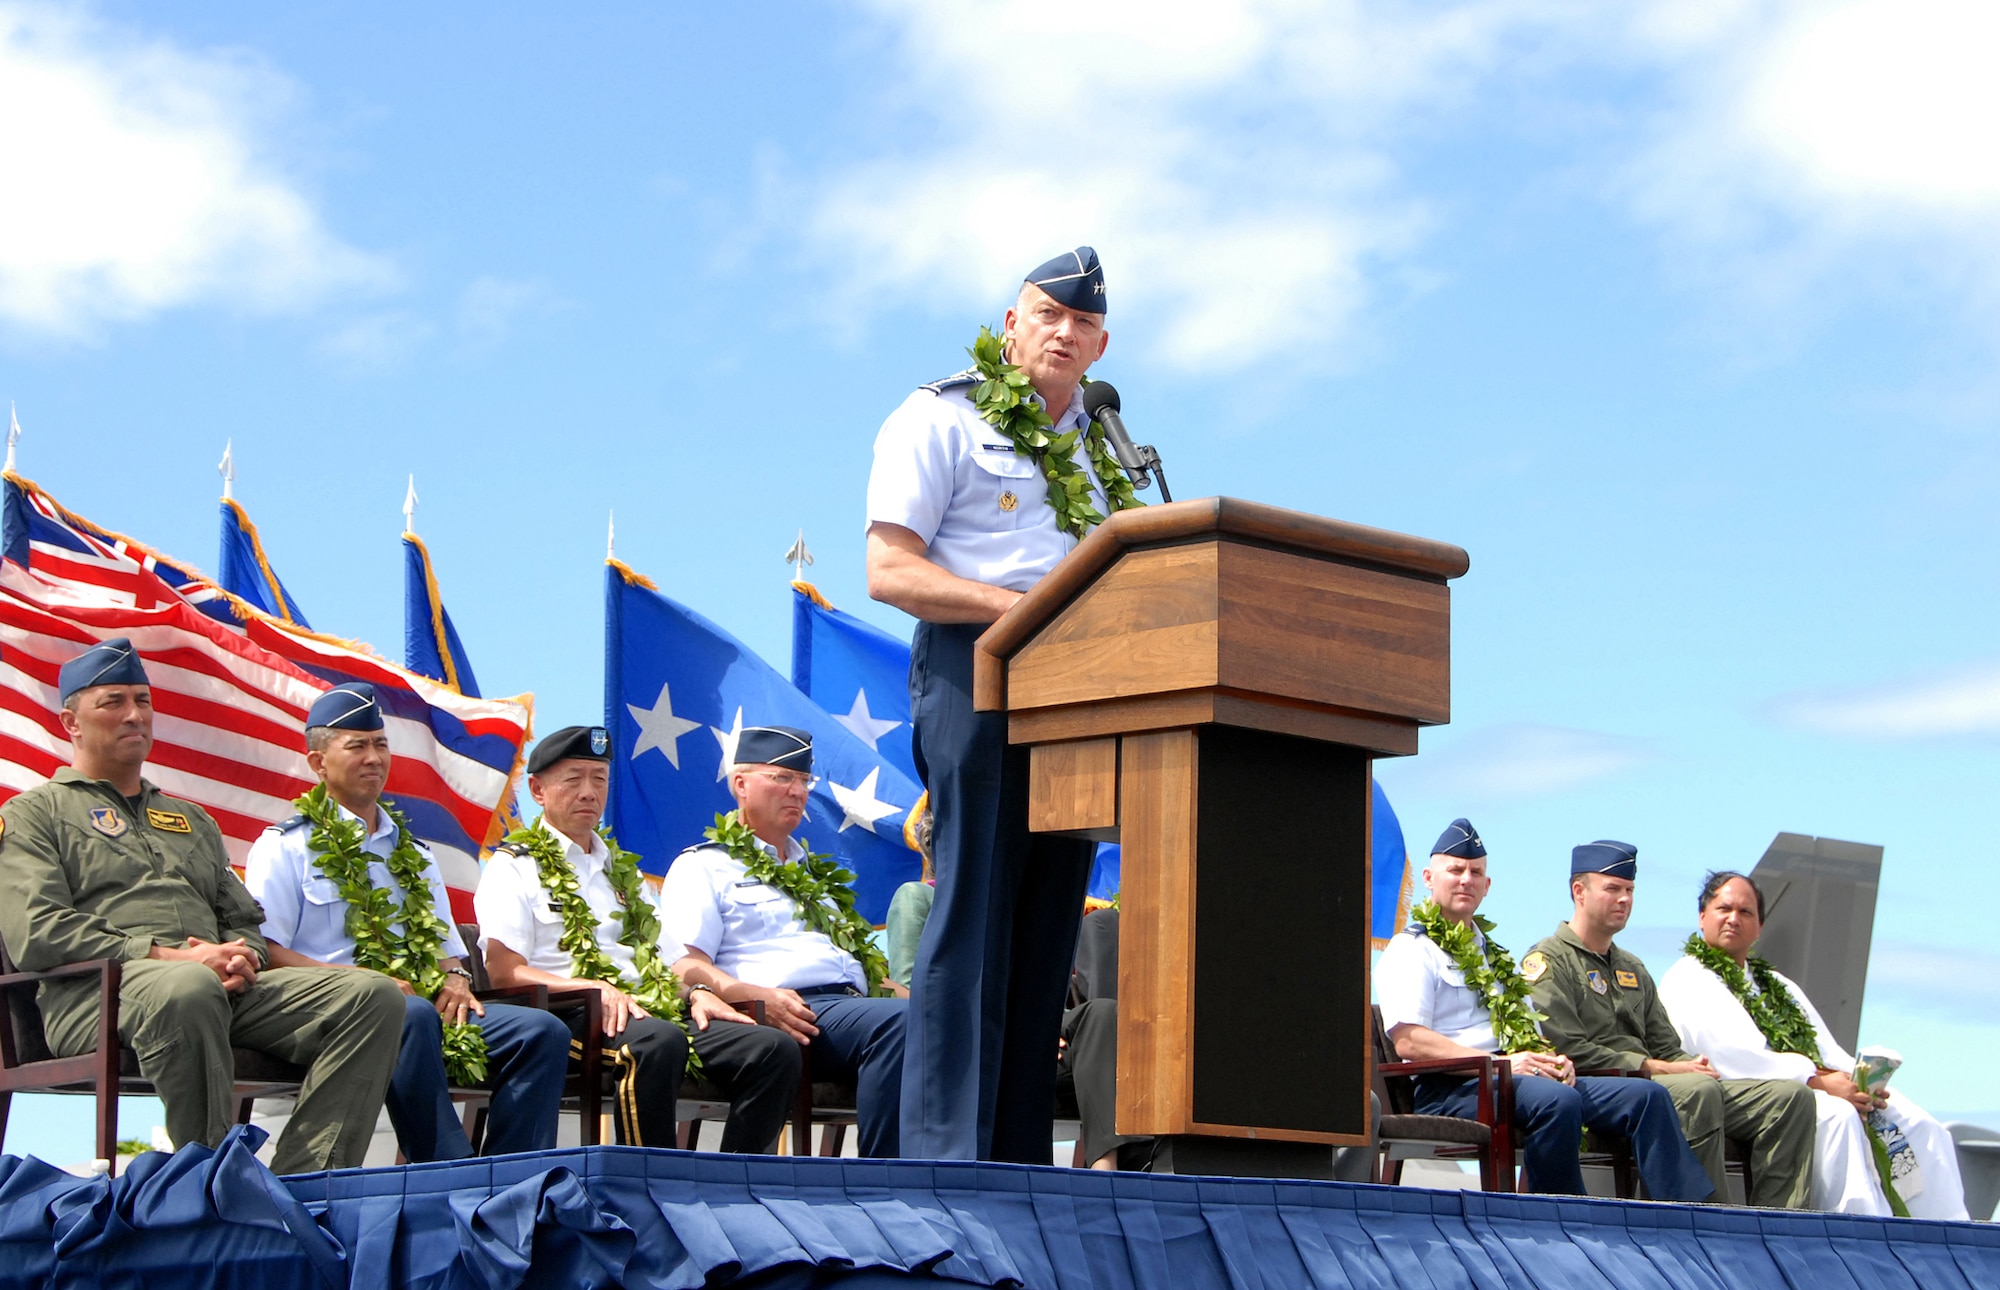 The F-22 Arrival Ceremony official party looks on as Gen. Gary L. North, commander, Pacific Forces, delivers a speech during ceremony July 9, on Joint Base Pearl Harbor-Hickam, Hawaii. "The arrival of the third squadron of F-22s to be based in the Pacific region is a tangible reminder of our U.S. commitment to peace and stability in the region. America, its alllies, partners and friends, have enjoyed the freedom of action provided by air dominance for over 50 years. Our 5th Generation USAF F-22 Raptor will ensure that edge continues for the next 50 years and beyond," said Gen. North. (U.S.Air Force photo/Tech. Sgt. Betty J. Squatrito-Martin)